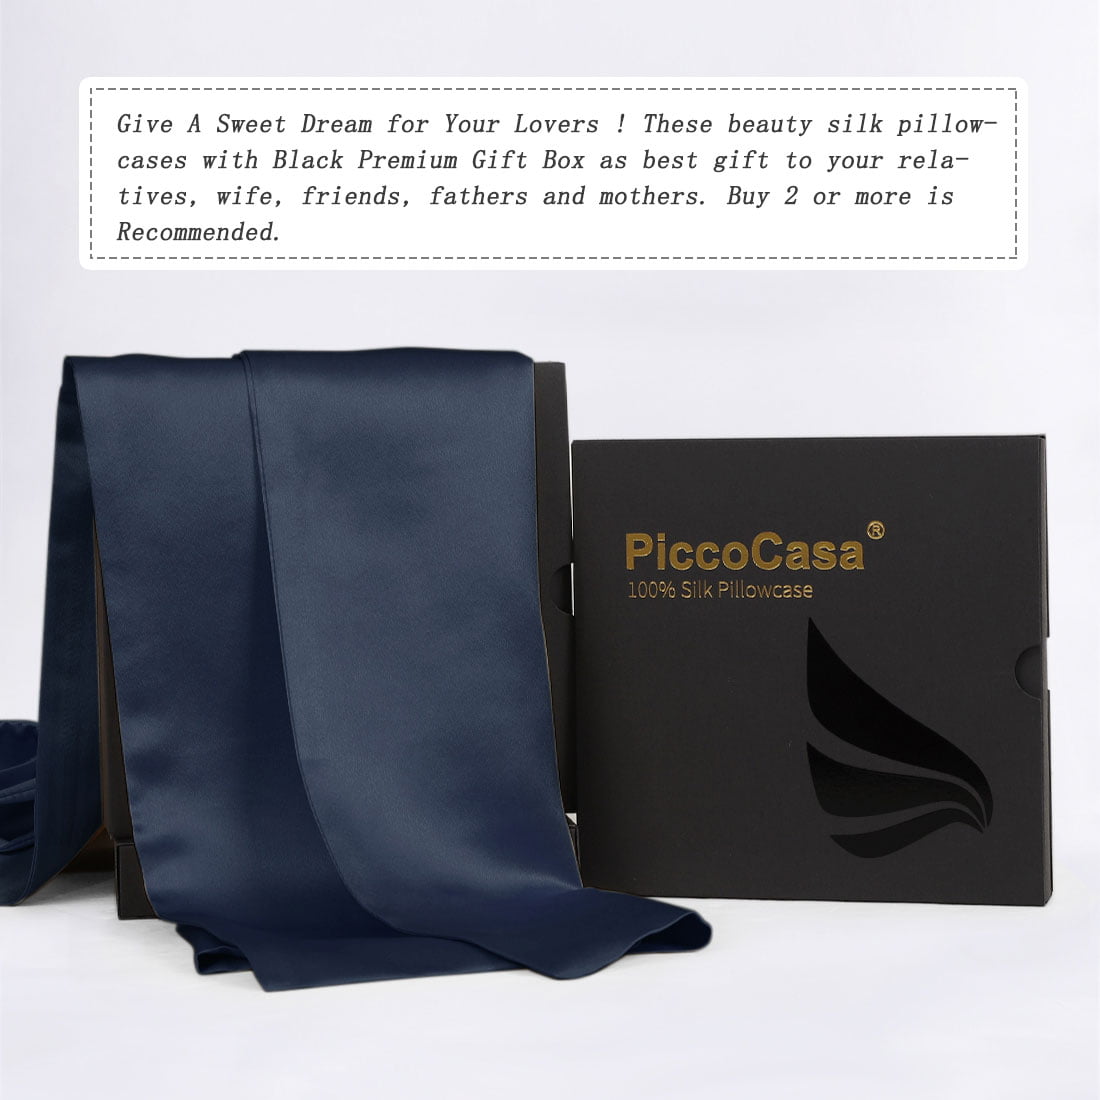 PiccoCasa 2Pcs 22 Momme Pure Silk Pillowcases, Navy Queen(20"x30") - image 3 of 6